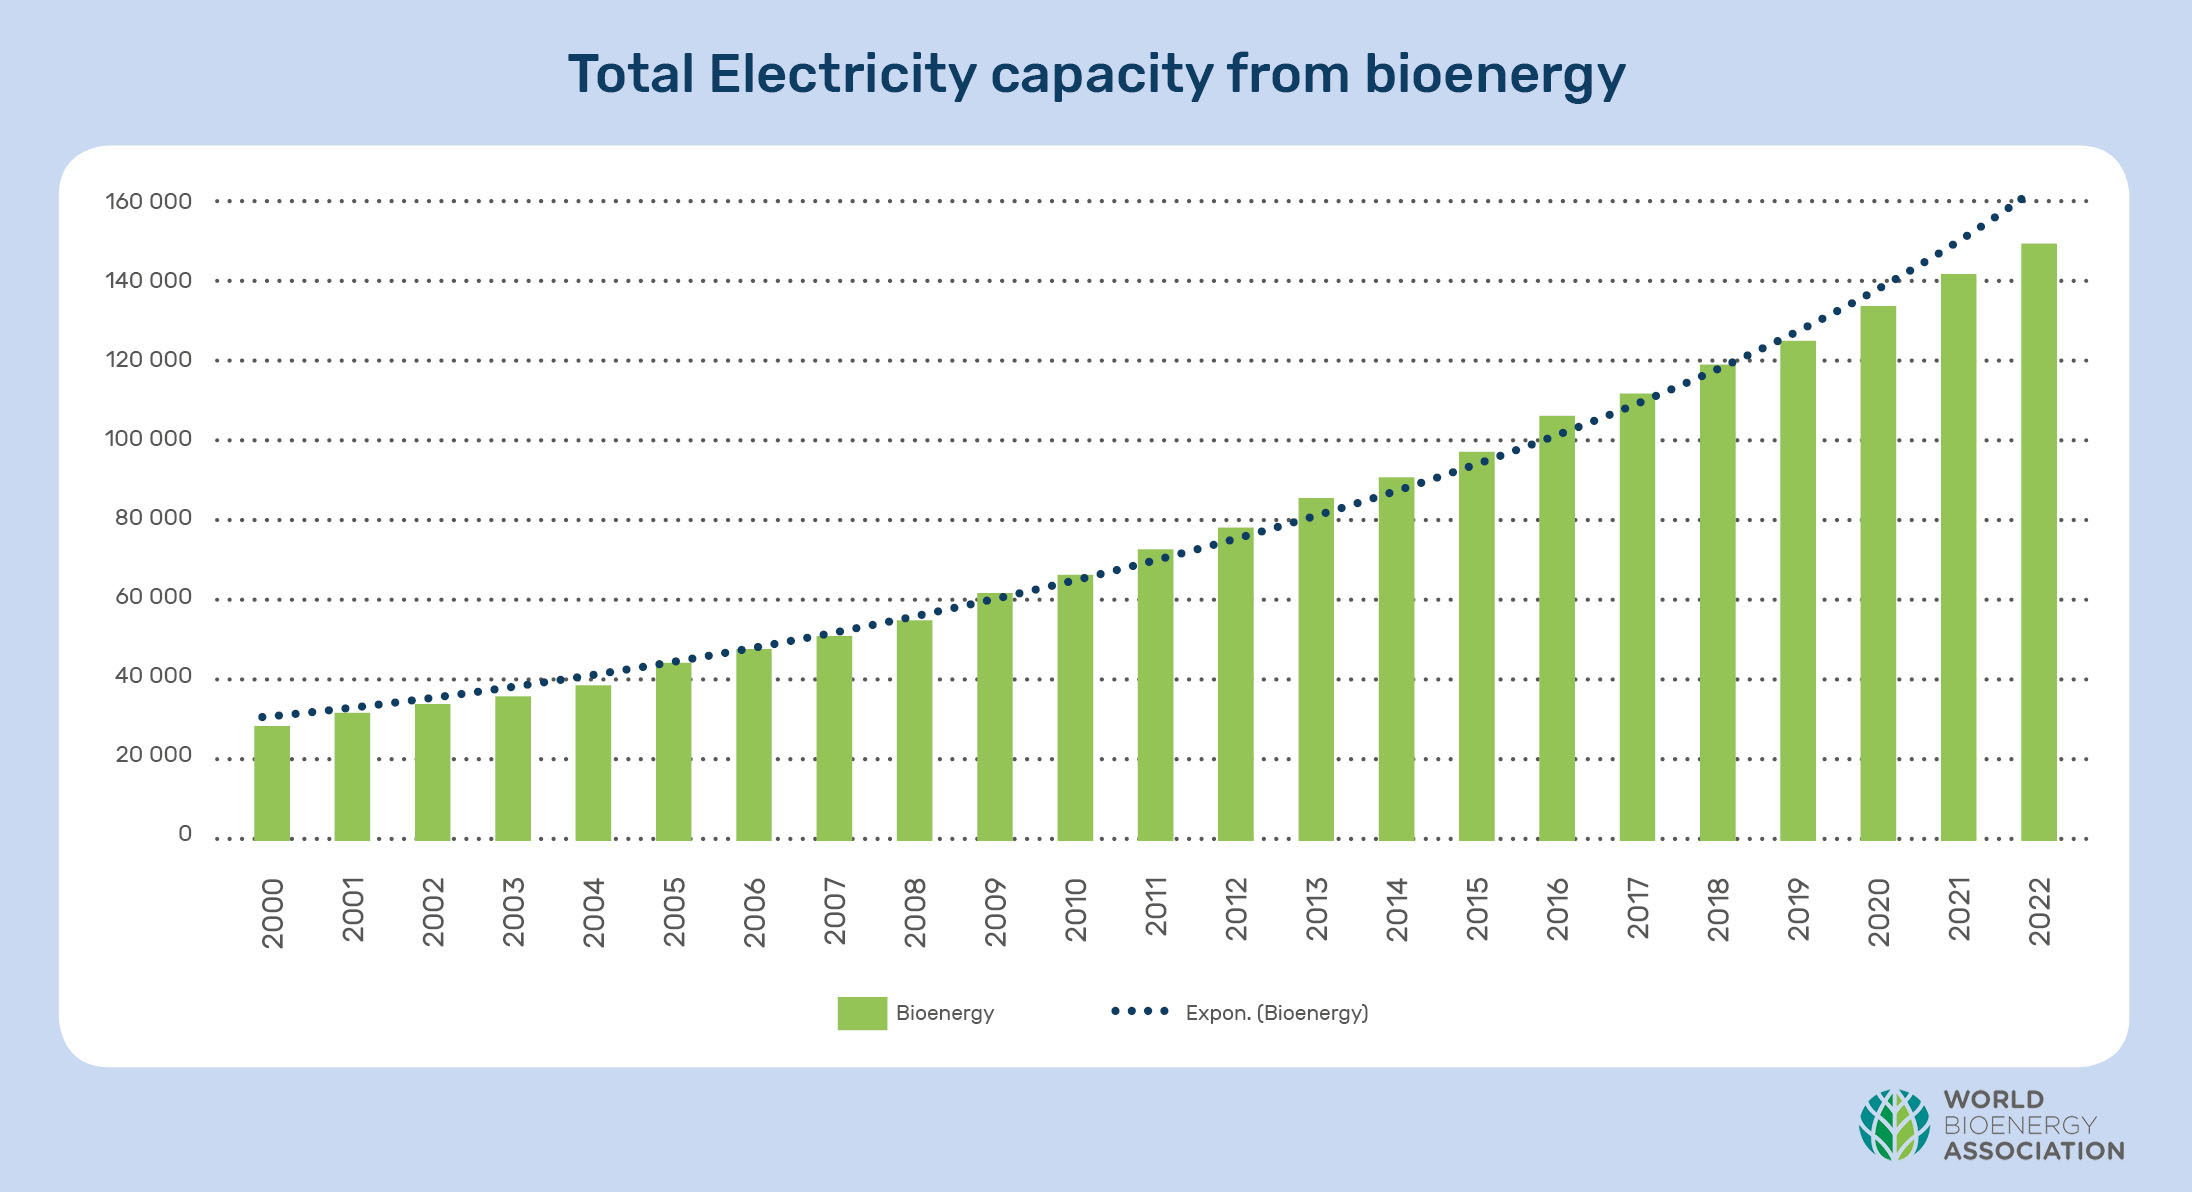 Total electricity capacity from bioenergy